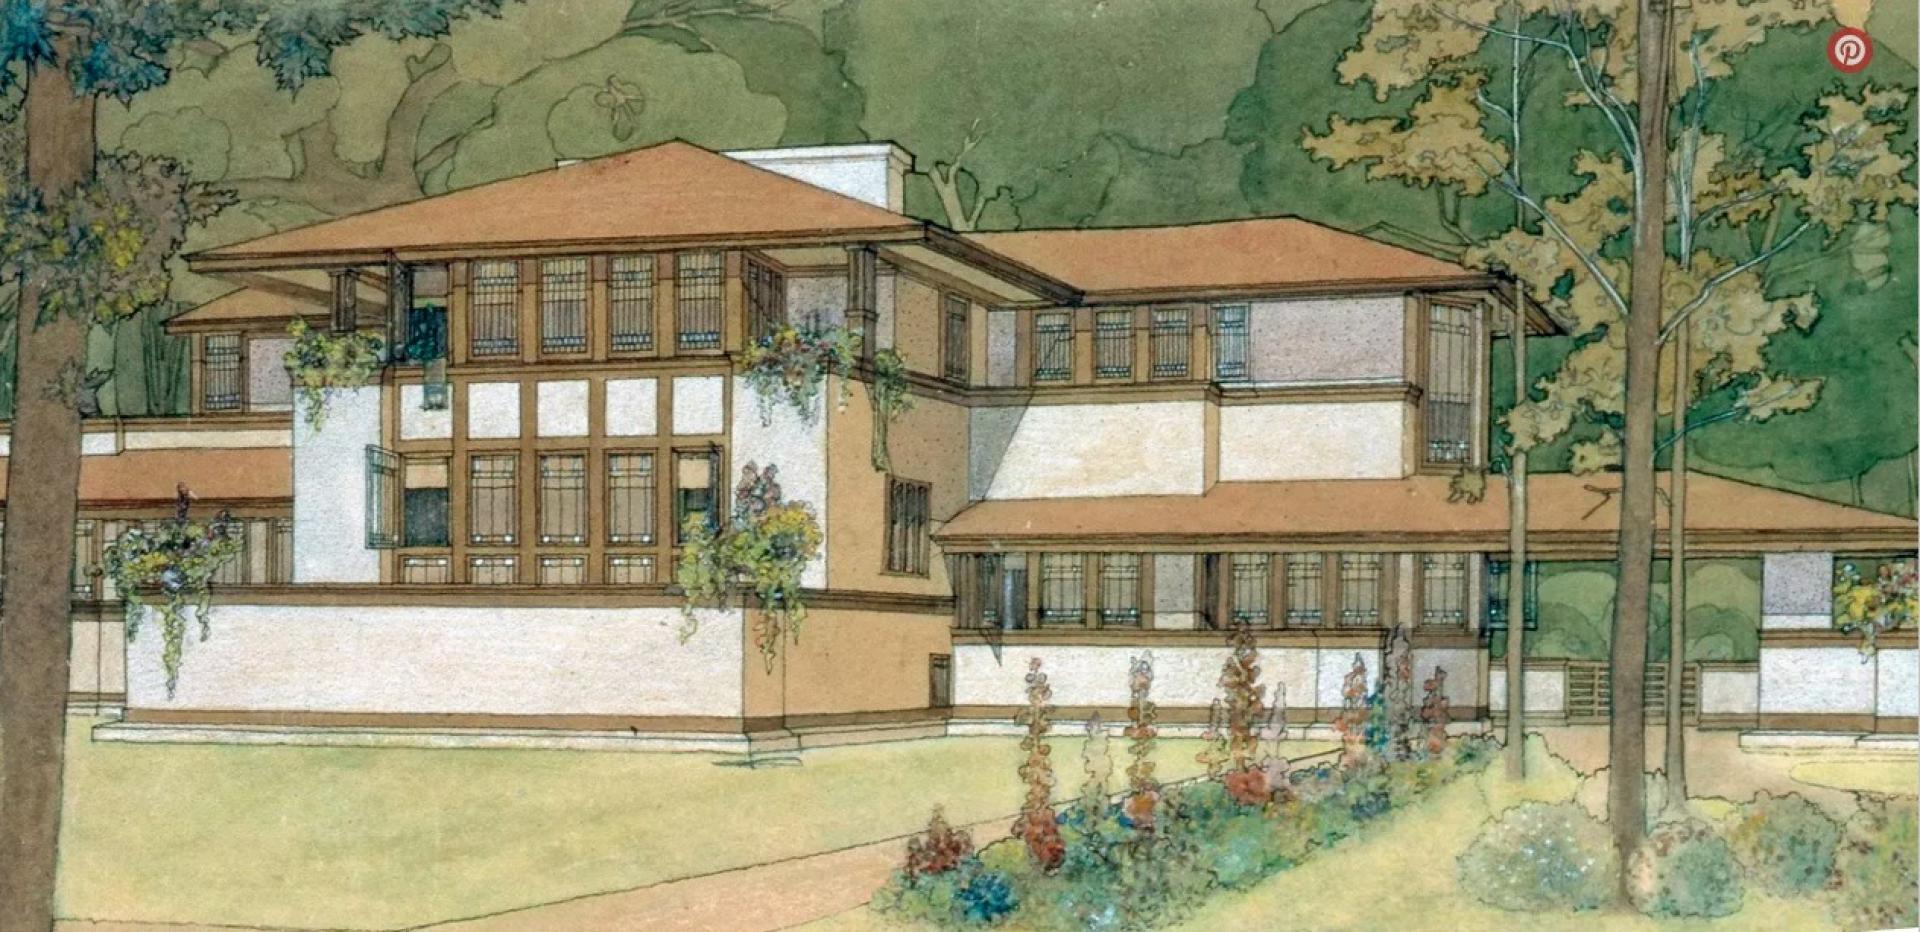 Ward W. Willits house, Highland Park, Illinois, 1902. Watercolor and ink rendering by Marion Mahony Griffin. | Photo via Frank Lloyd Wright Foundation/Frank Lloyd Wright Trust